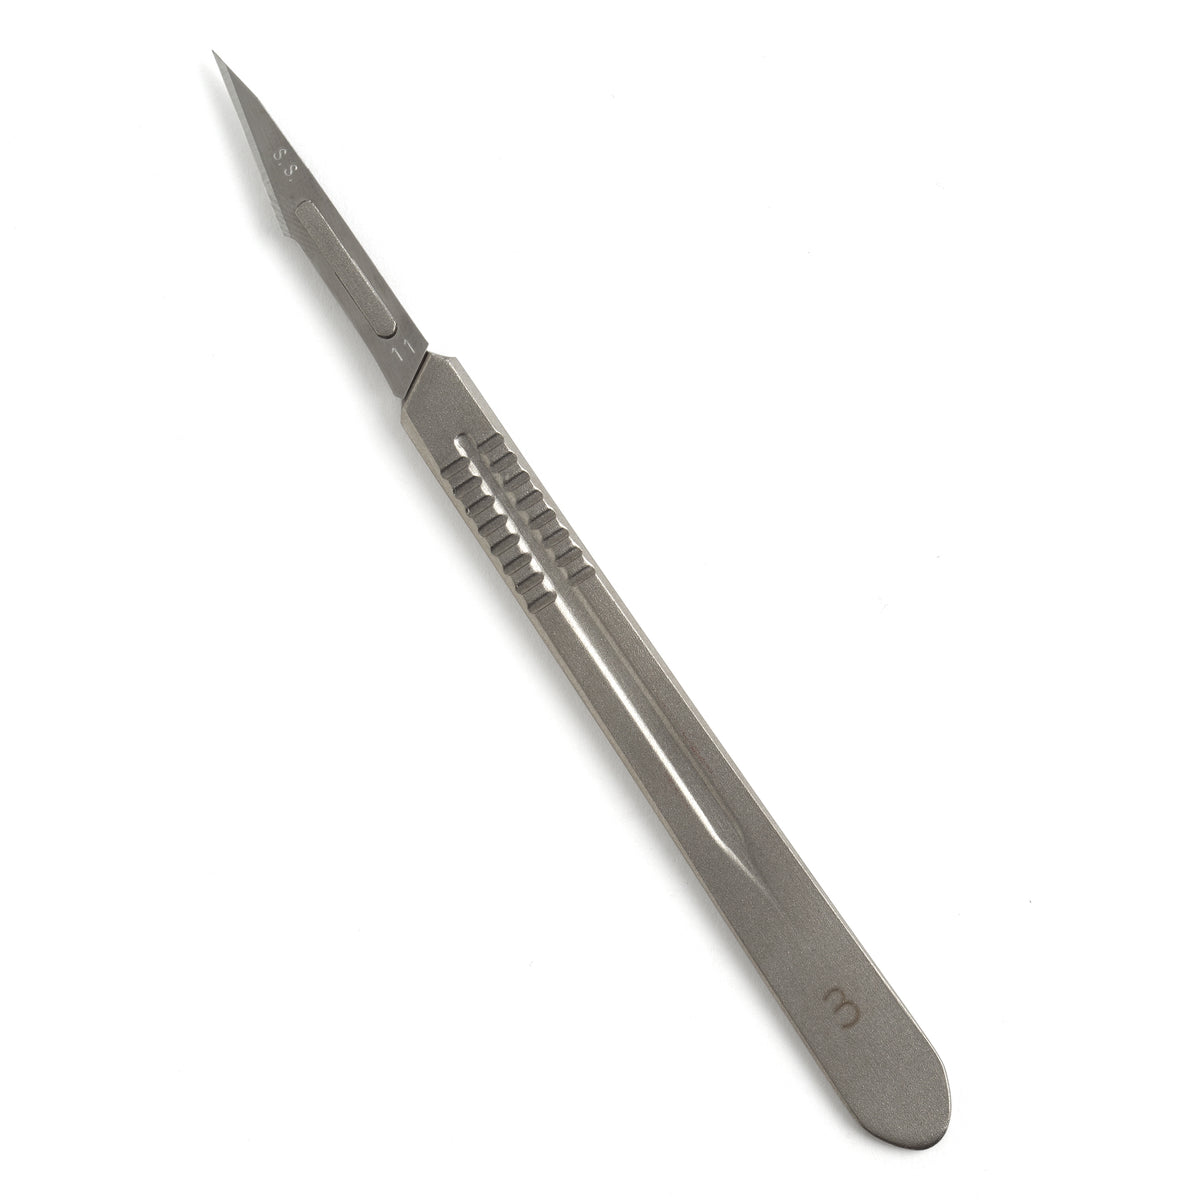 Scalpel for cutting and decorating leather